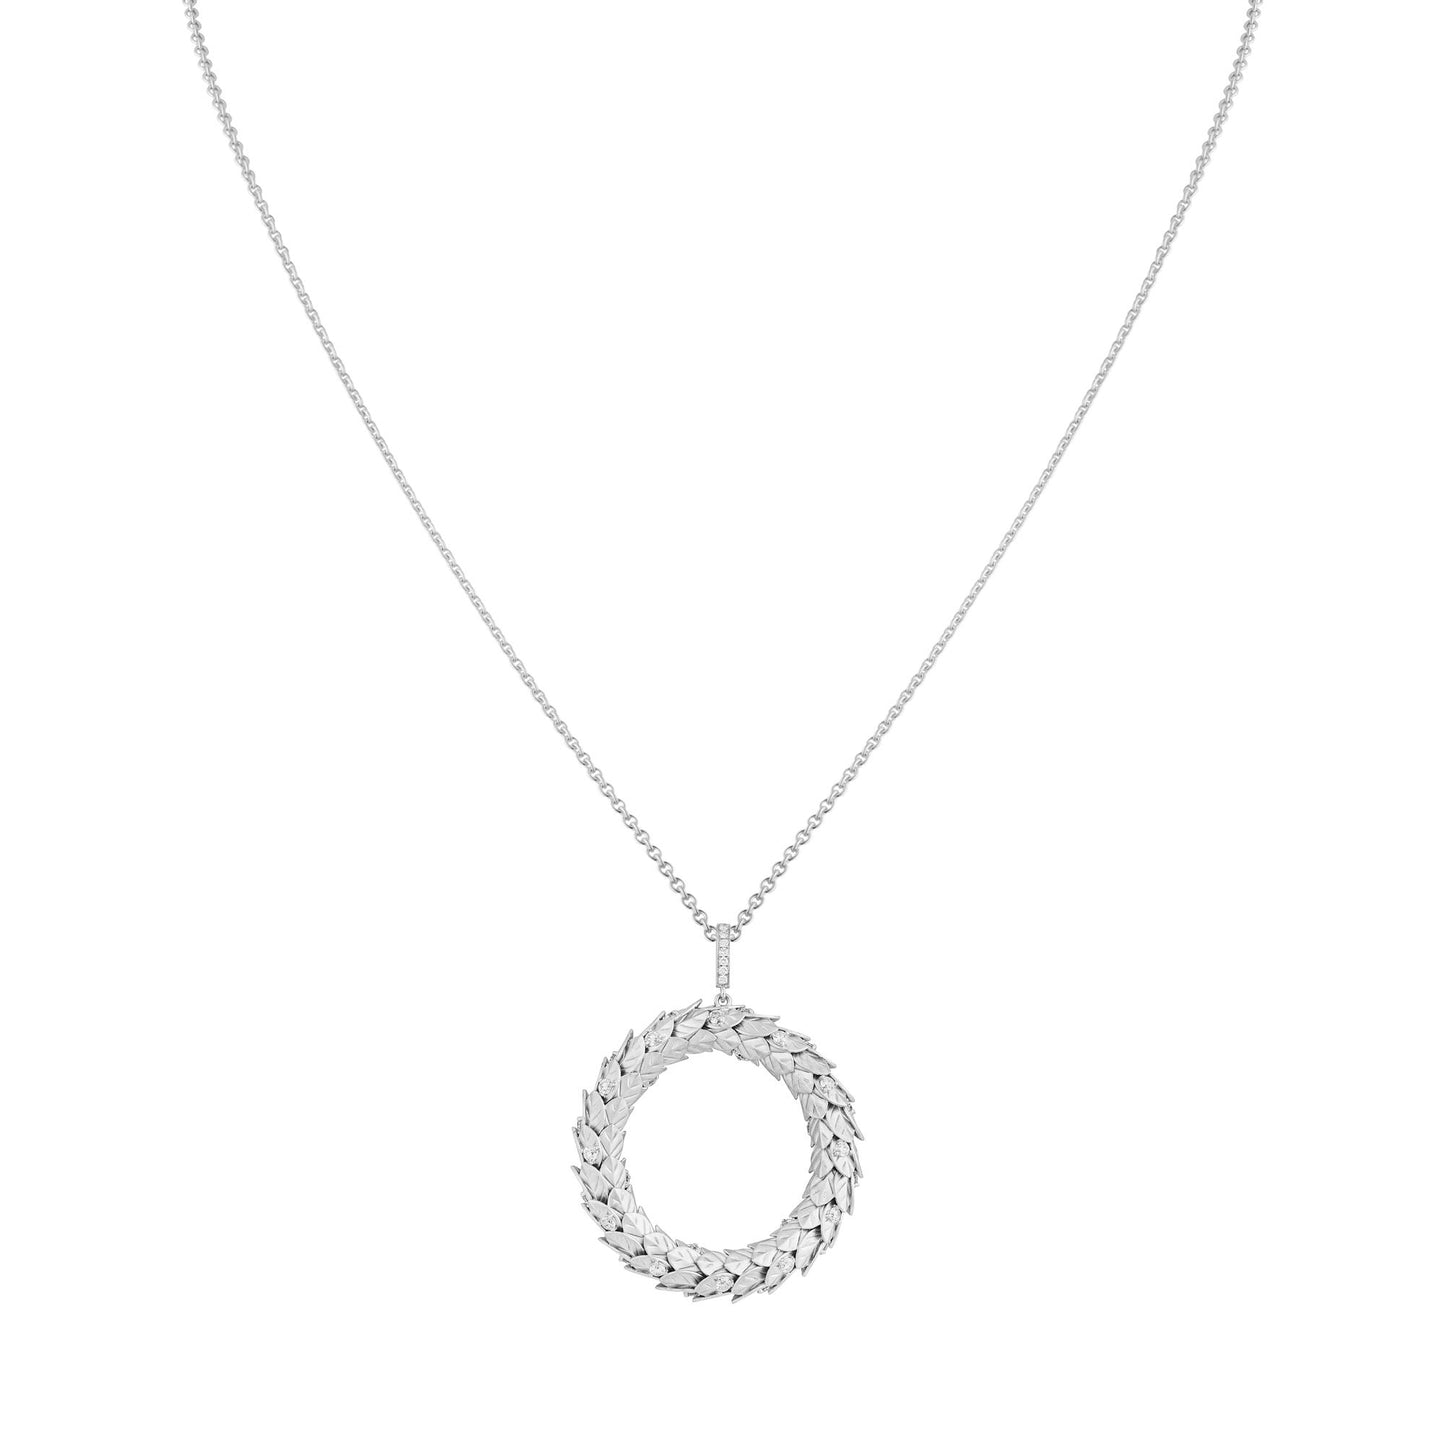 Wreath Pendant in 18ct White Gold with Pavé Diamonds